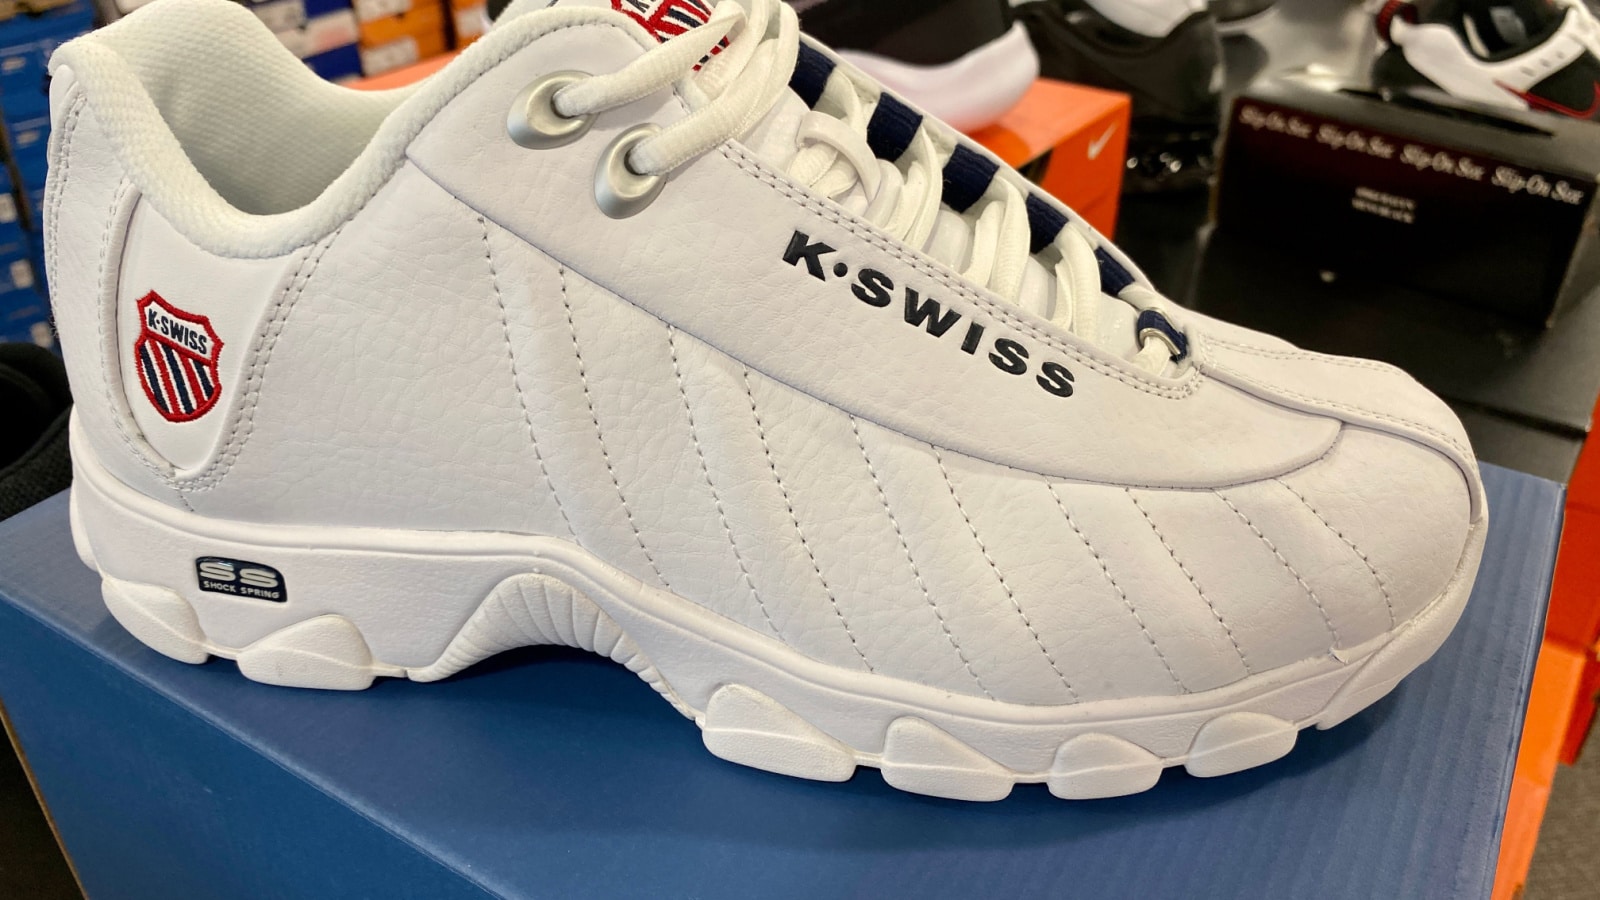 Ros, CA - March 6, 2021: New K- Swiss white shoe on top of a box inside a footwear store.